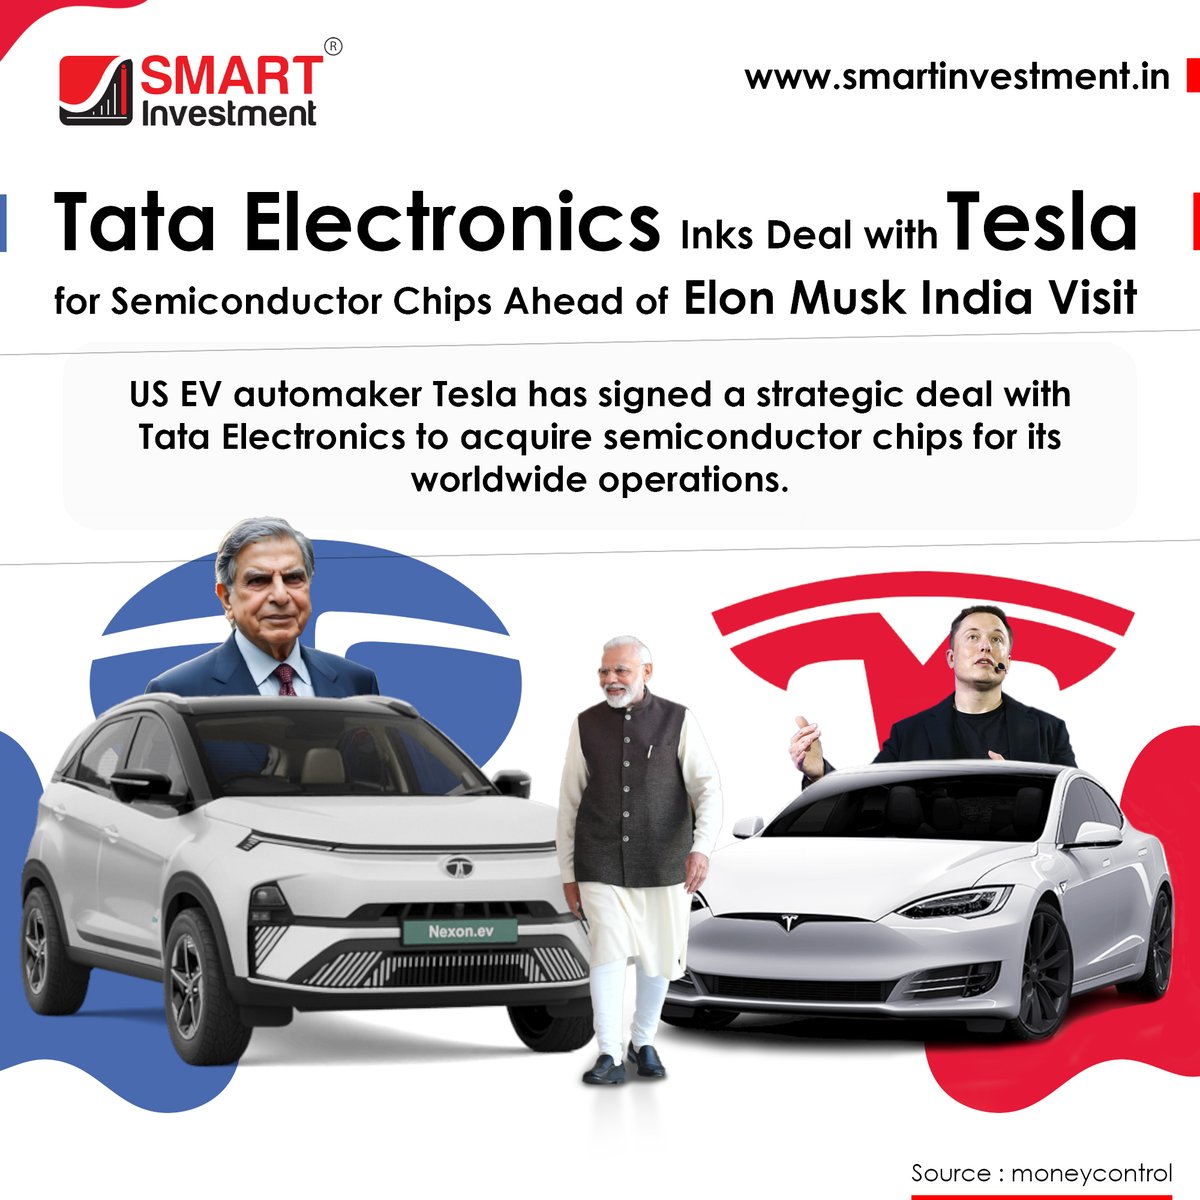 Tesla has signed a strategic deal with Tata Electronics
.
Follow for More
.
#tesla #TataElectric #newstoday #smartinvestment